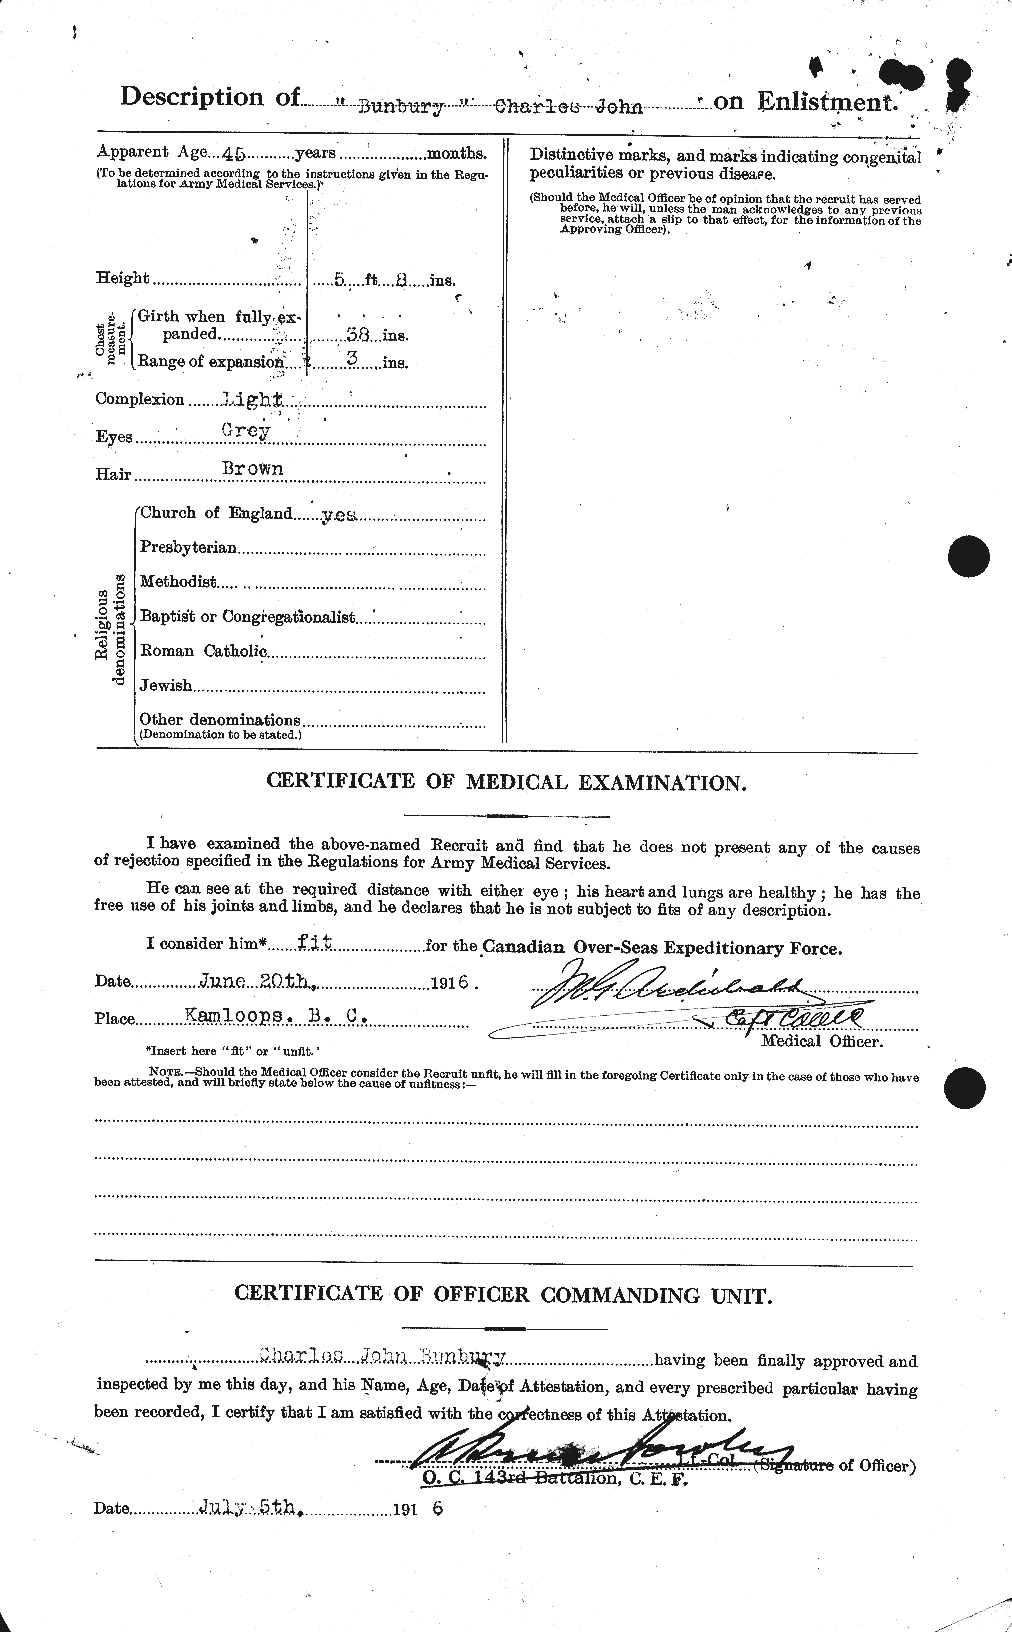 Personnel Records of the First World War - CEF 269884b